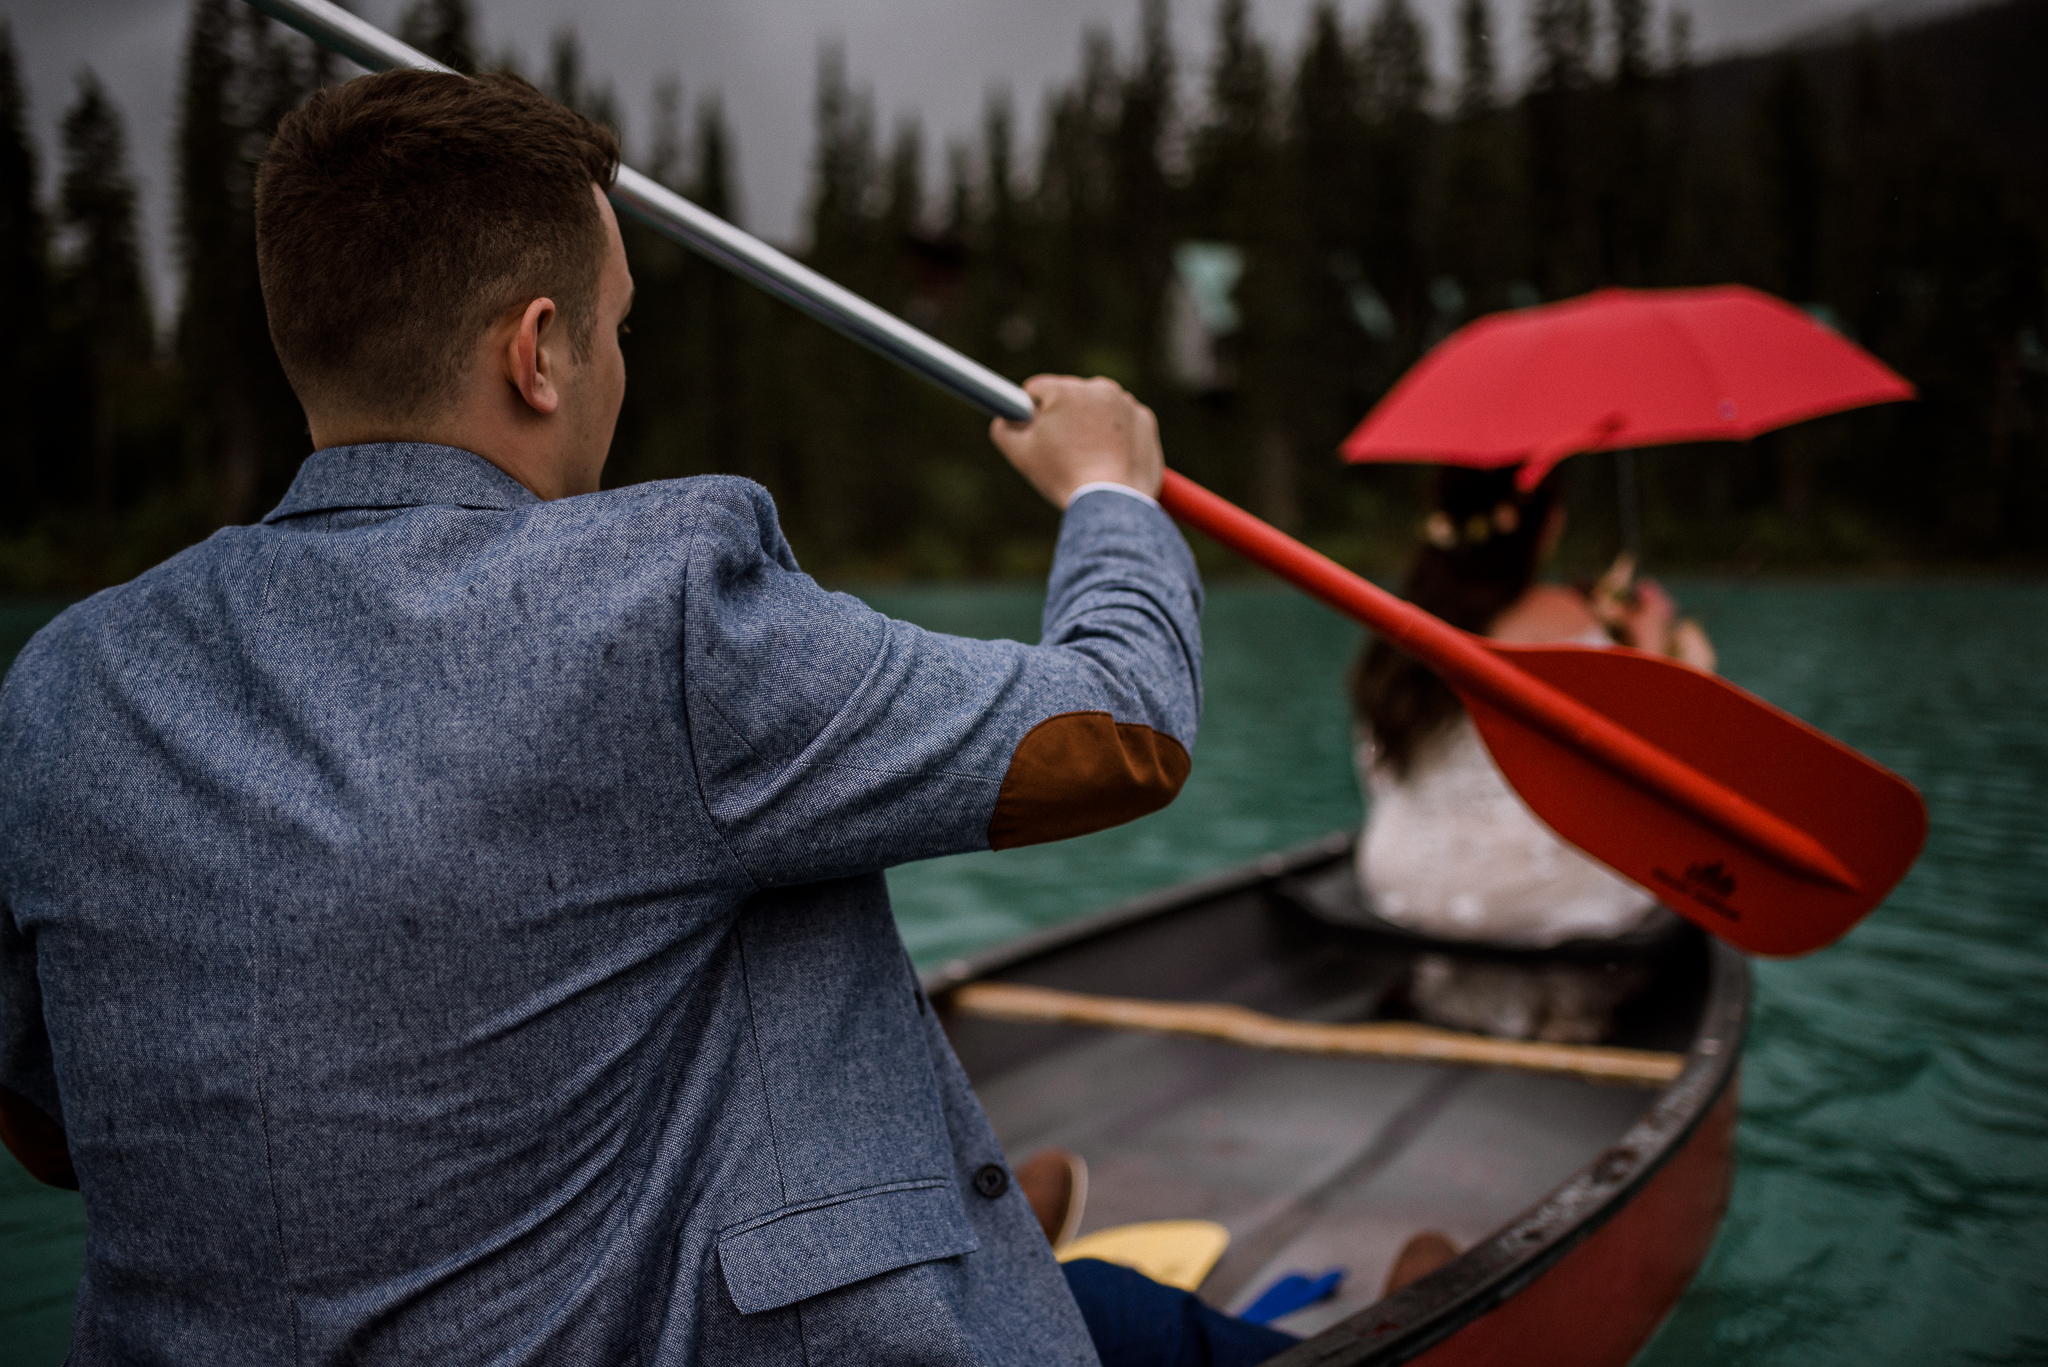 Close up groom paddling a canoe with bride holding red umbrella at Emerald Lake, BC